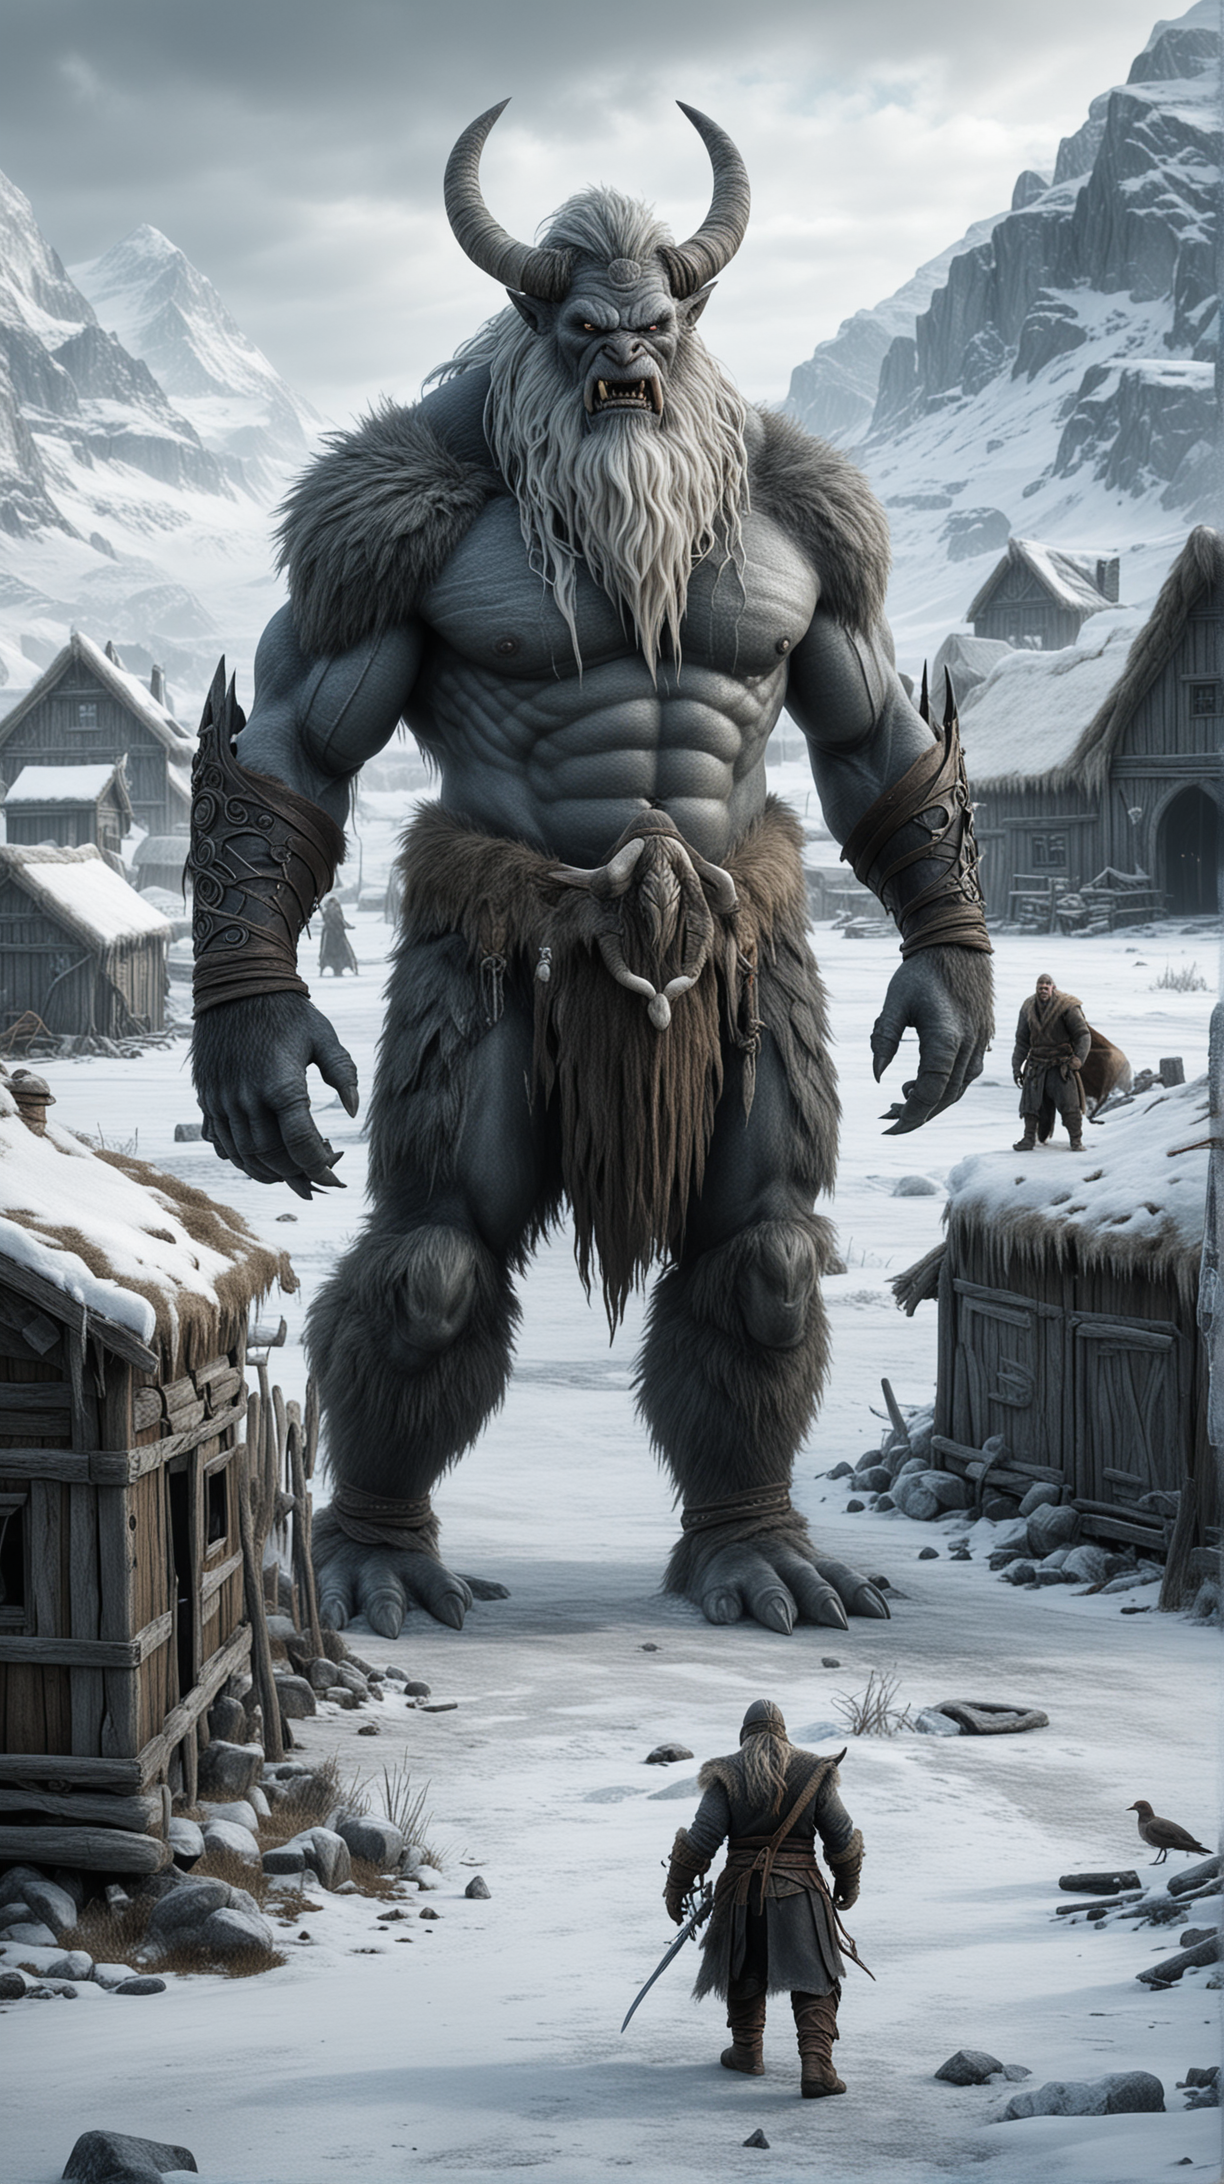 Norse Mythology Creature and Monster, empty frozen village on background, photo-realistic, hyper-realistic